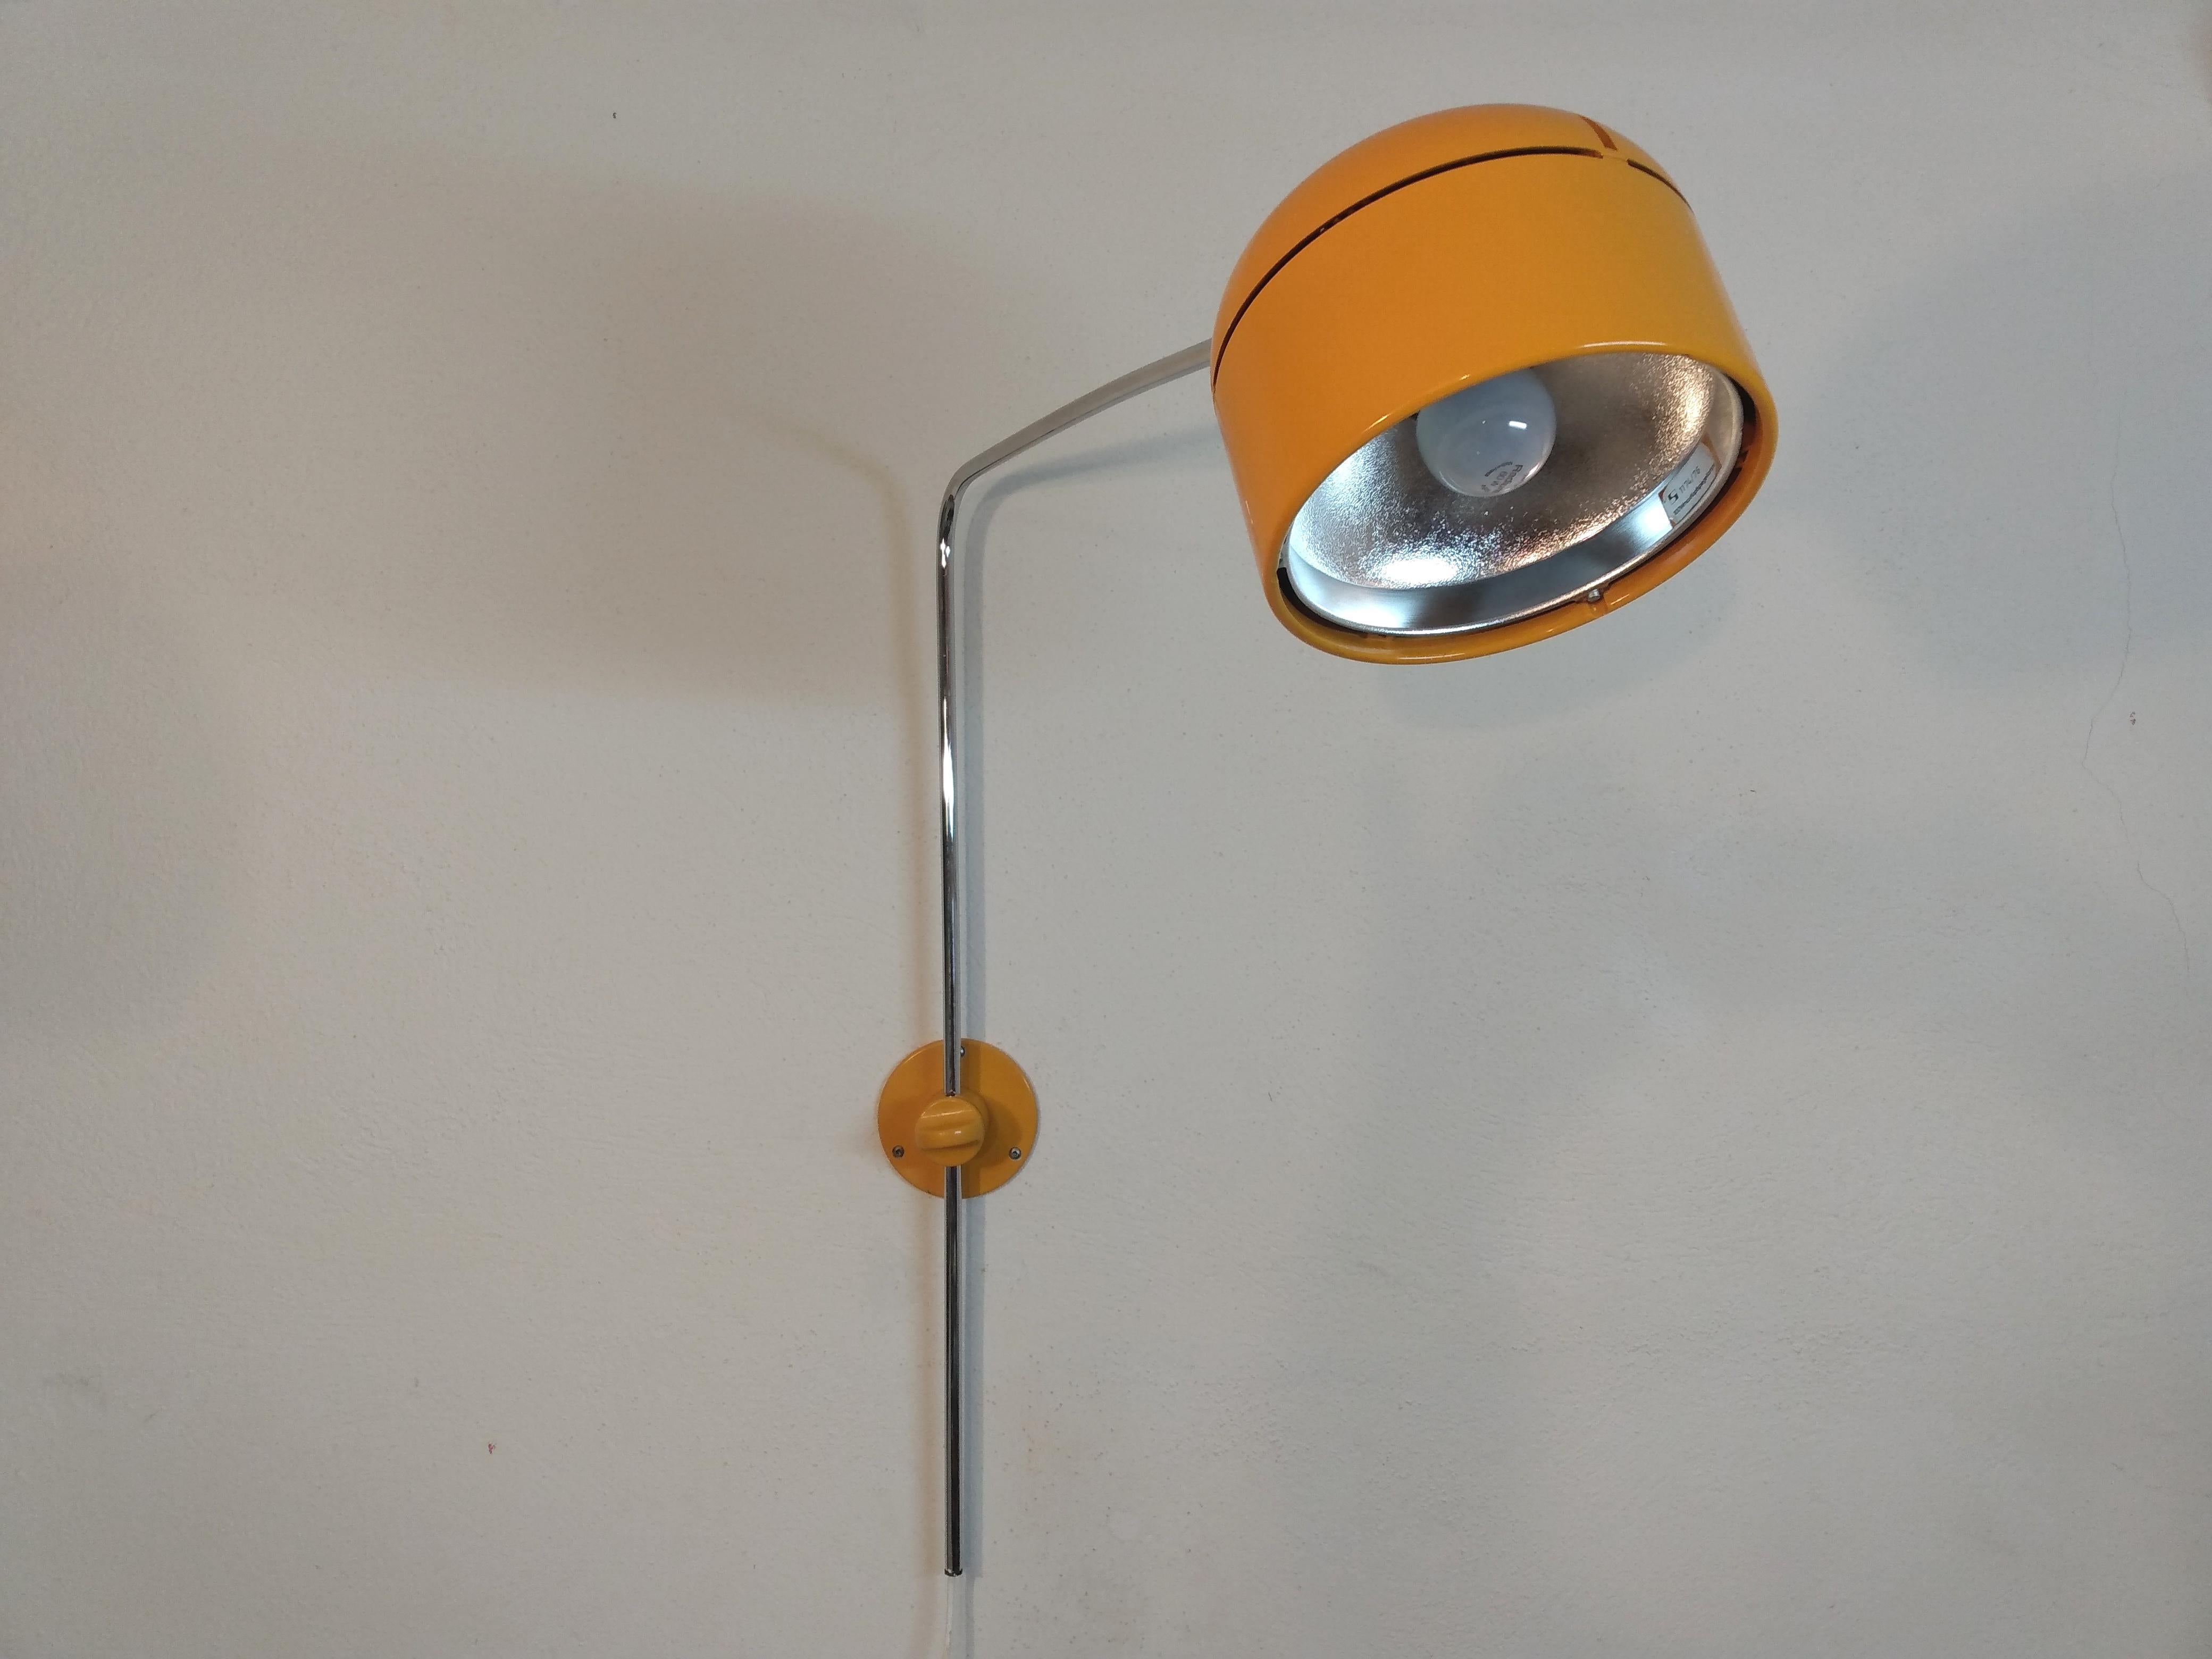 Large wall lamp with swivel arm, 1970s.
Company Staff, model no. 1174/76 - design Arnold Berges - the pendant lamp of this series won the if design award in 1973, see last picture.

Exceptional light from the traditional company Staff from West